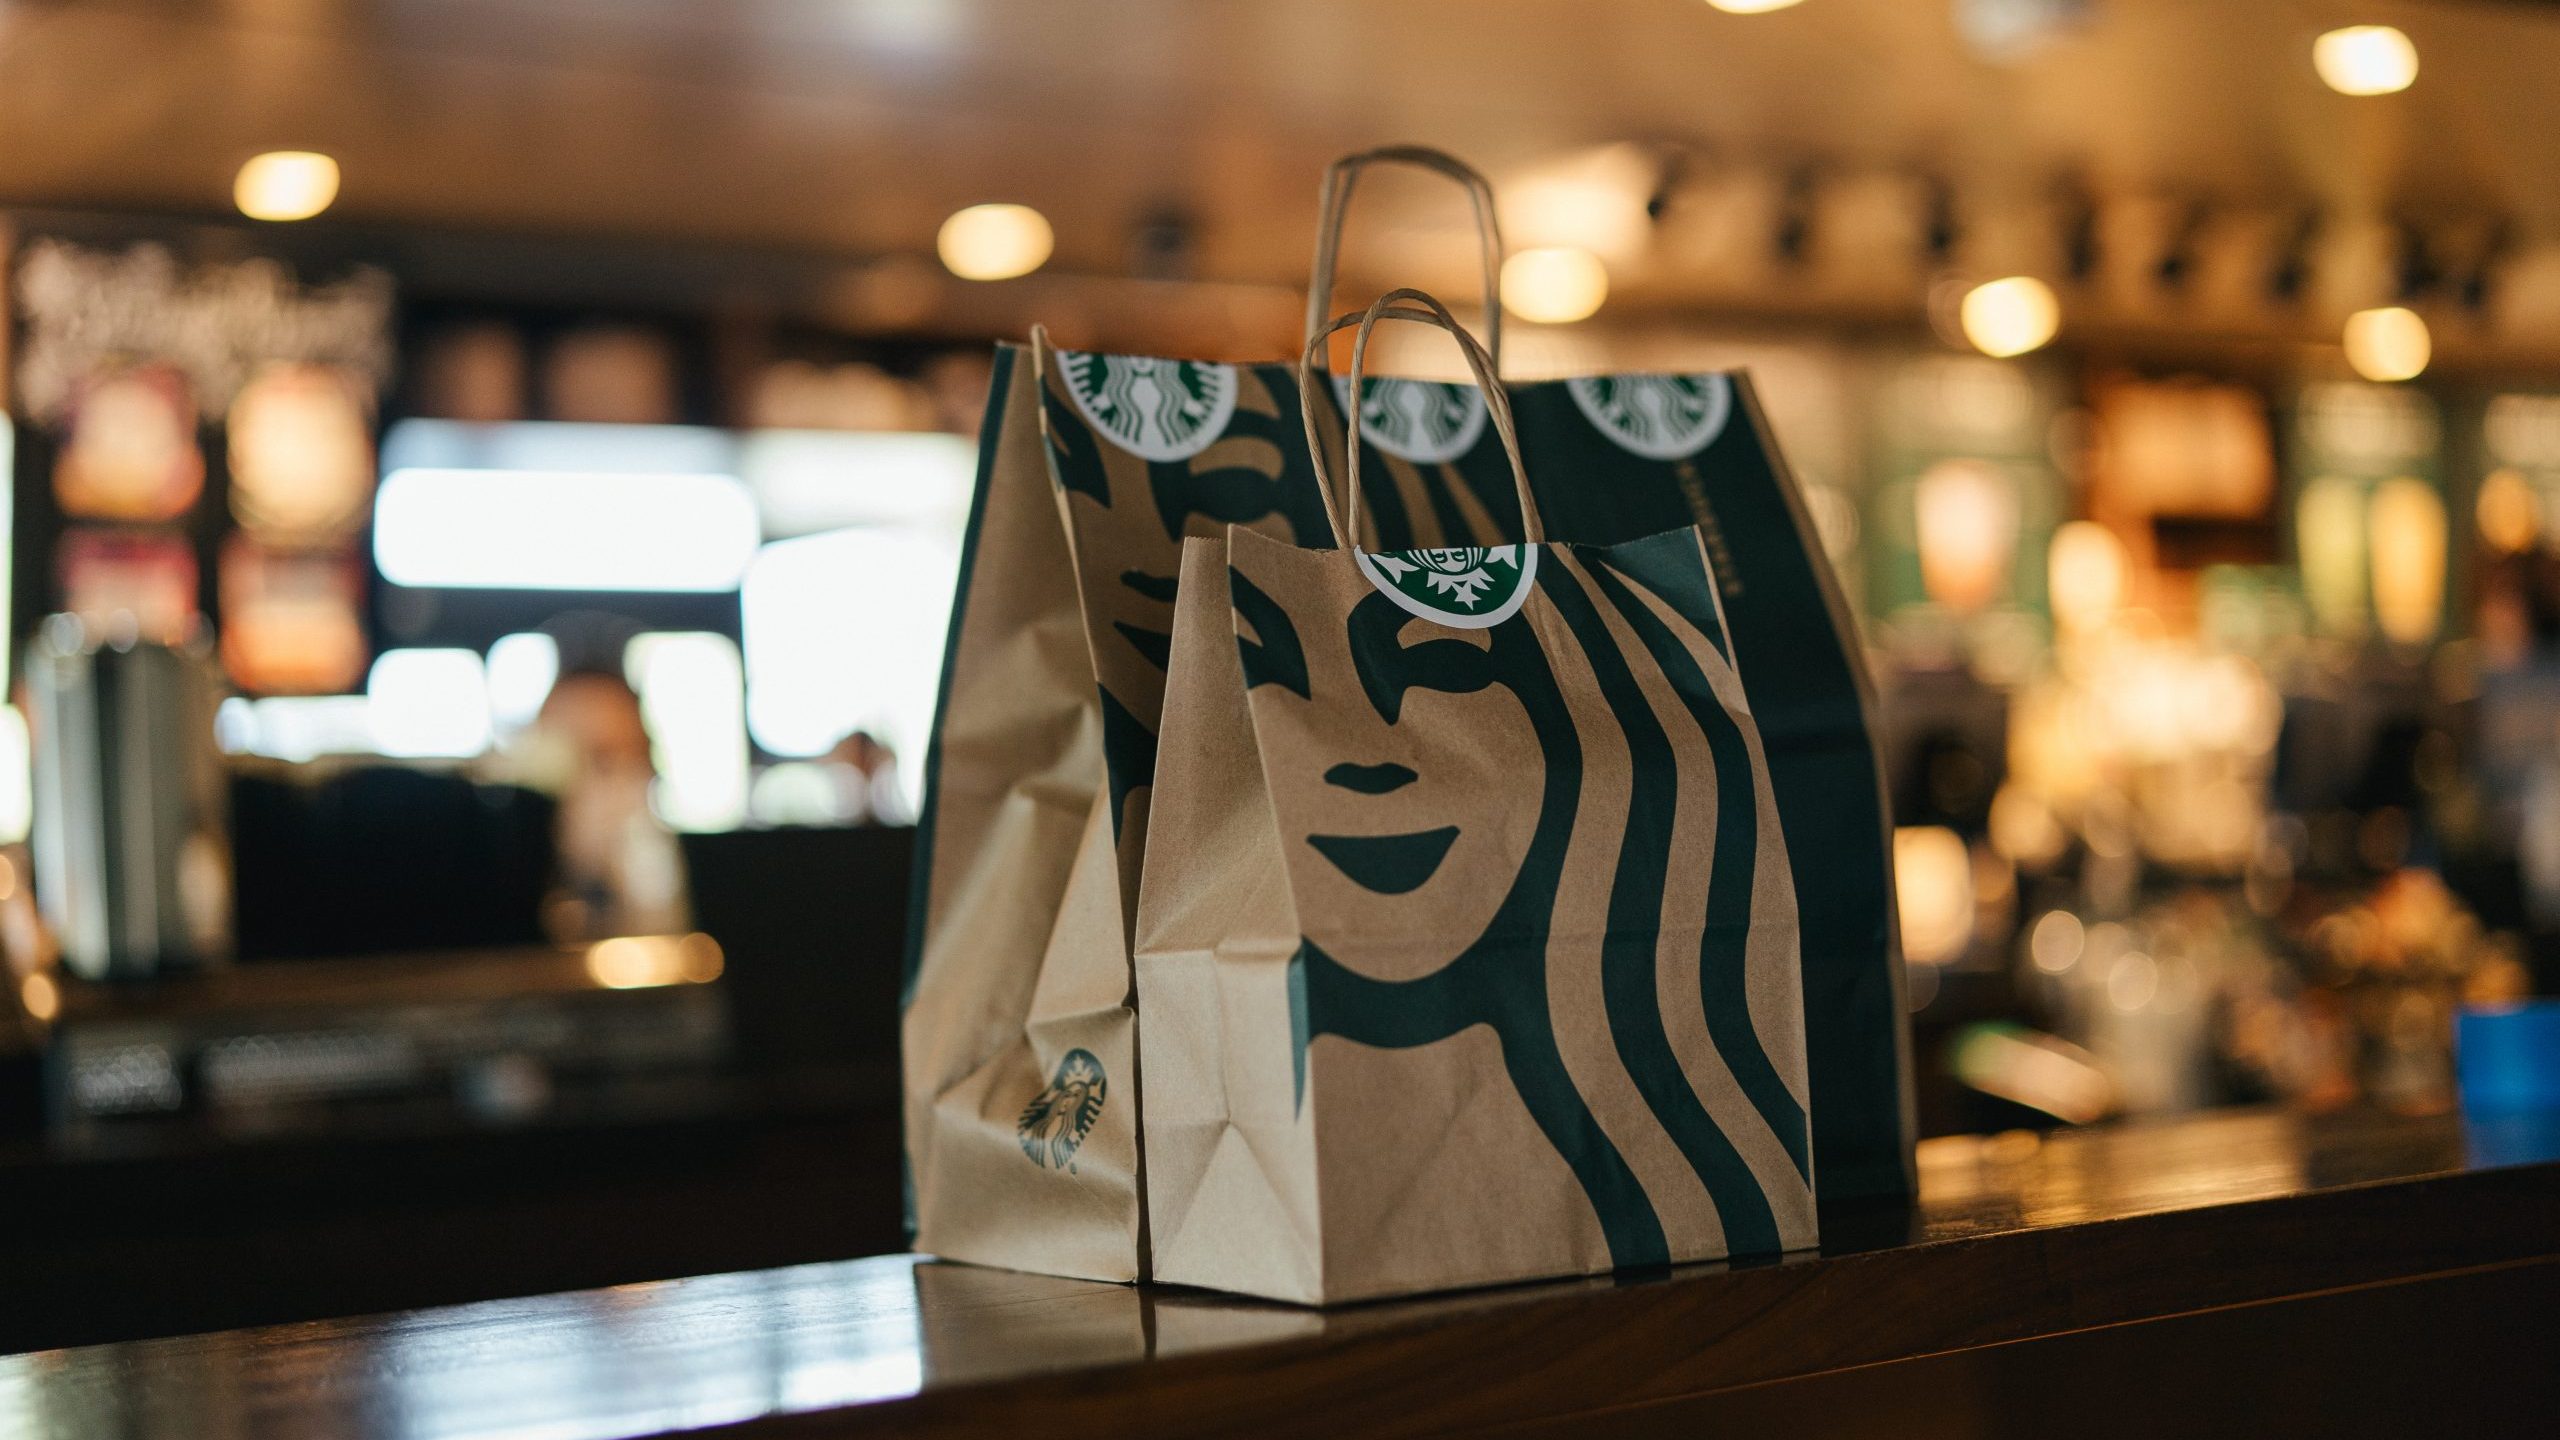 Starbucks bag ready for delivery